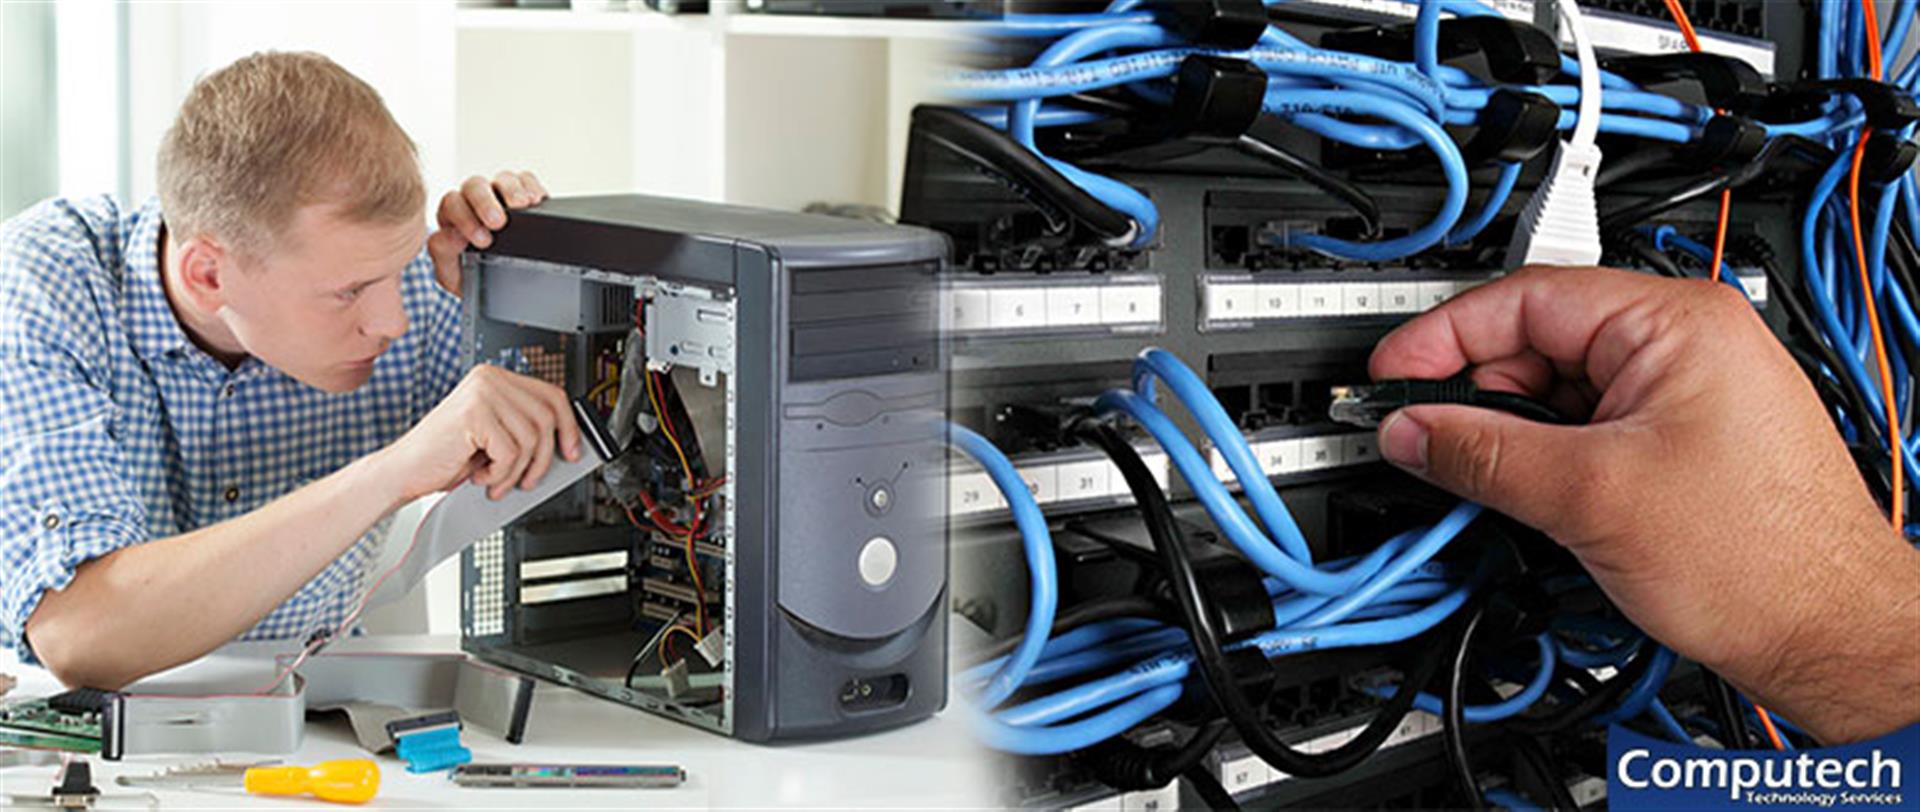 Lake City Tennessee On-Site Computer PC & Printer Repair, Network, Voice & Data Cabling Services